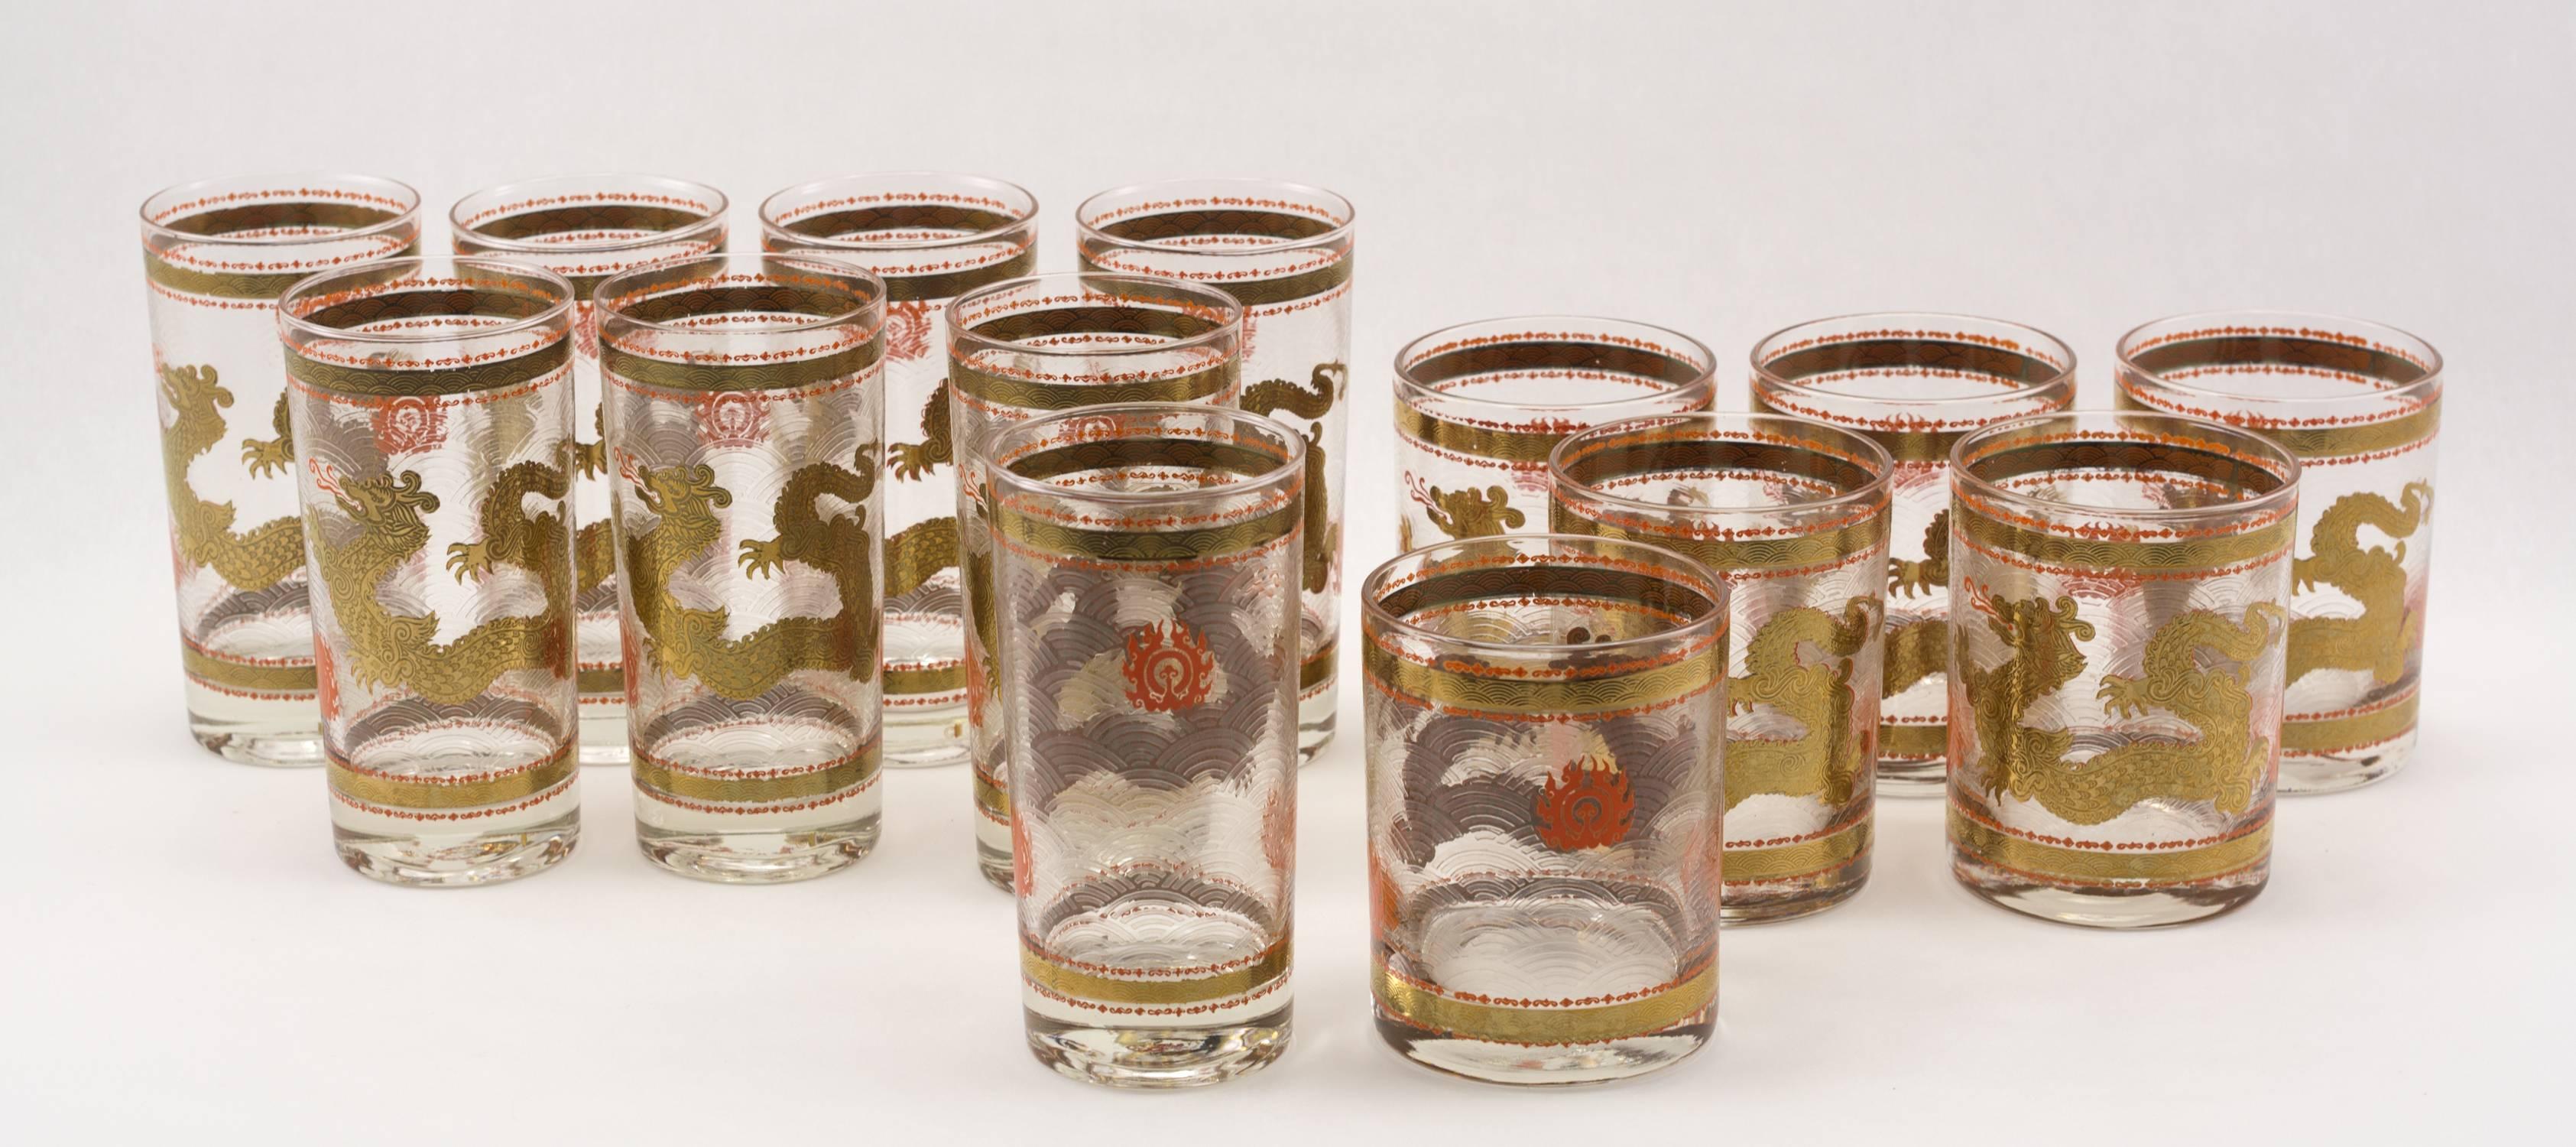 14-piece vintage barware set with dragons and flaming
Pearls in 22 karat gold and orange enamel on a frosted ground
with a textured surface.
Eight highball and six rocks glasses.

Measurements:
Highball  5-1/2” H
Rocks 4-1/8”